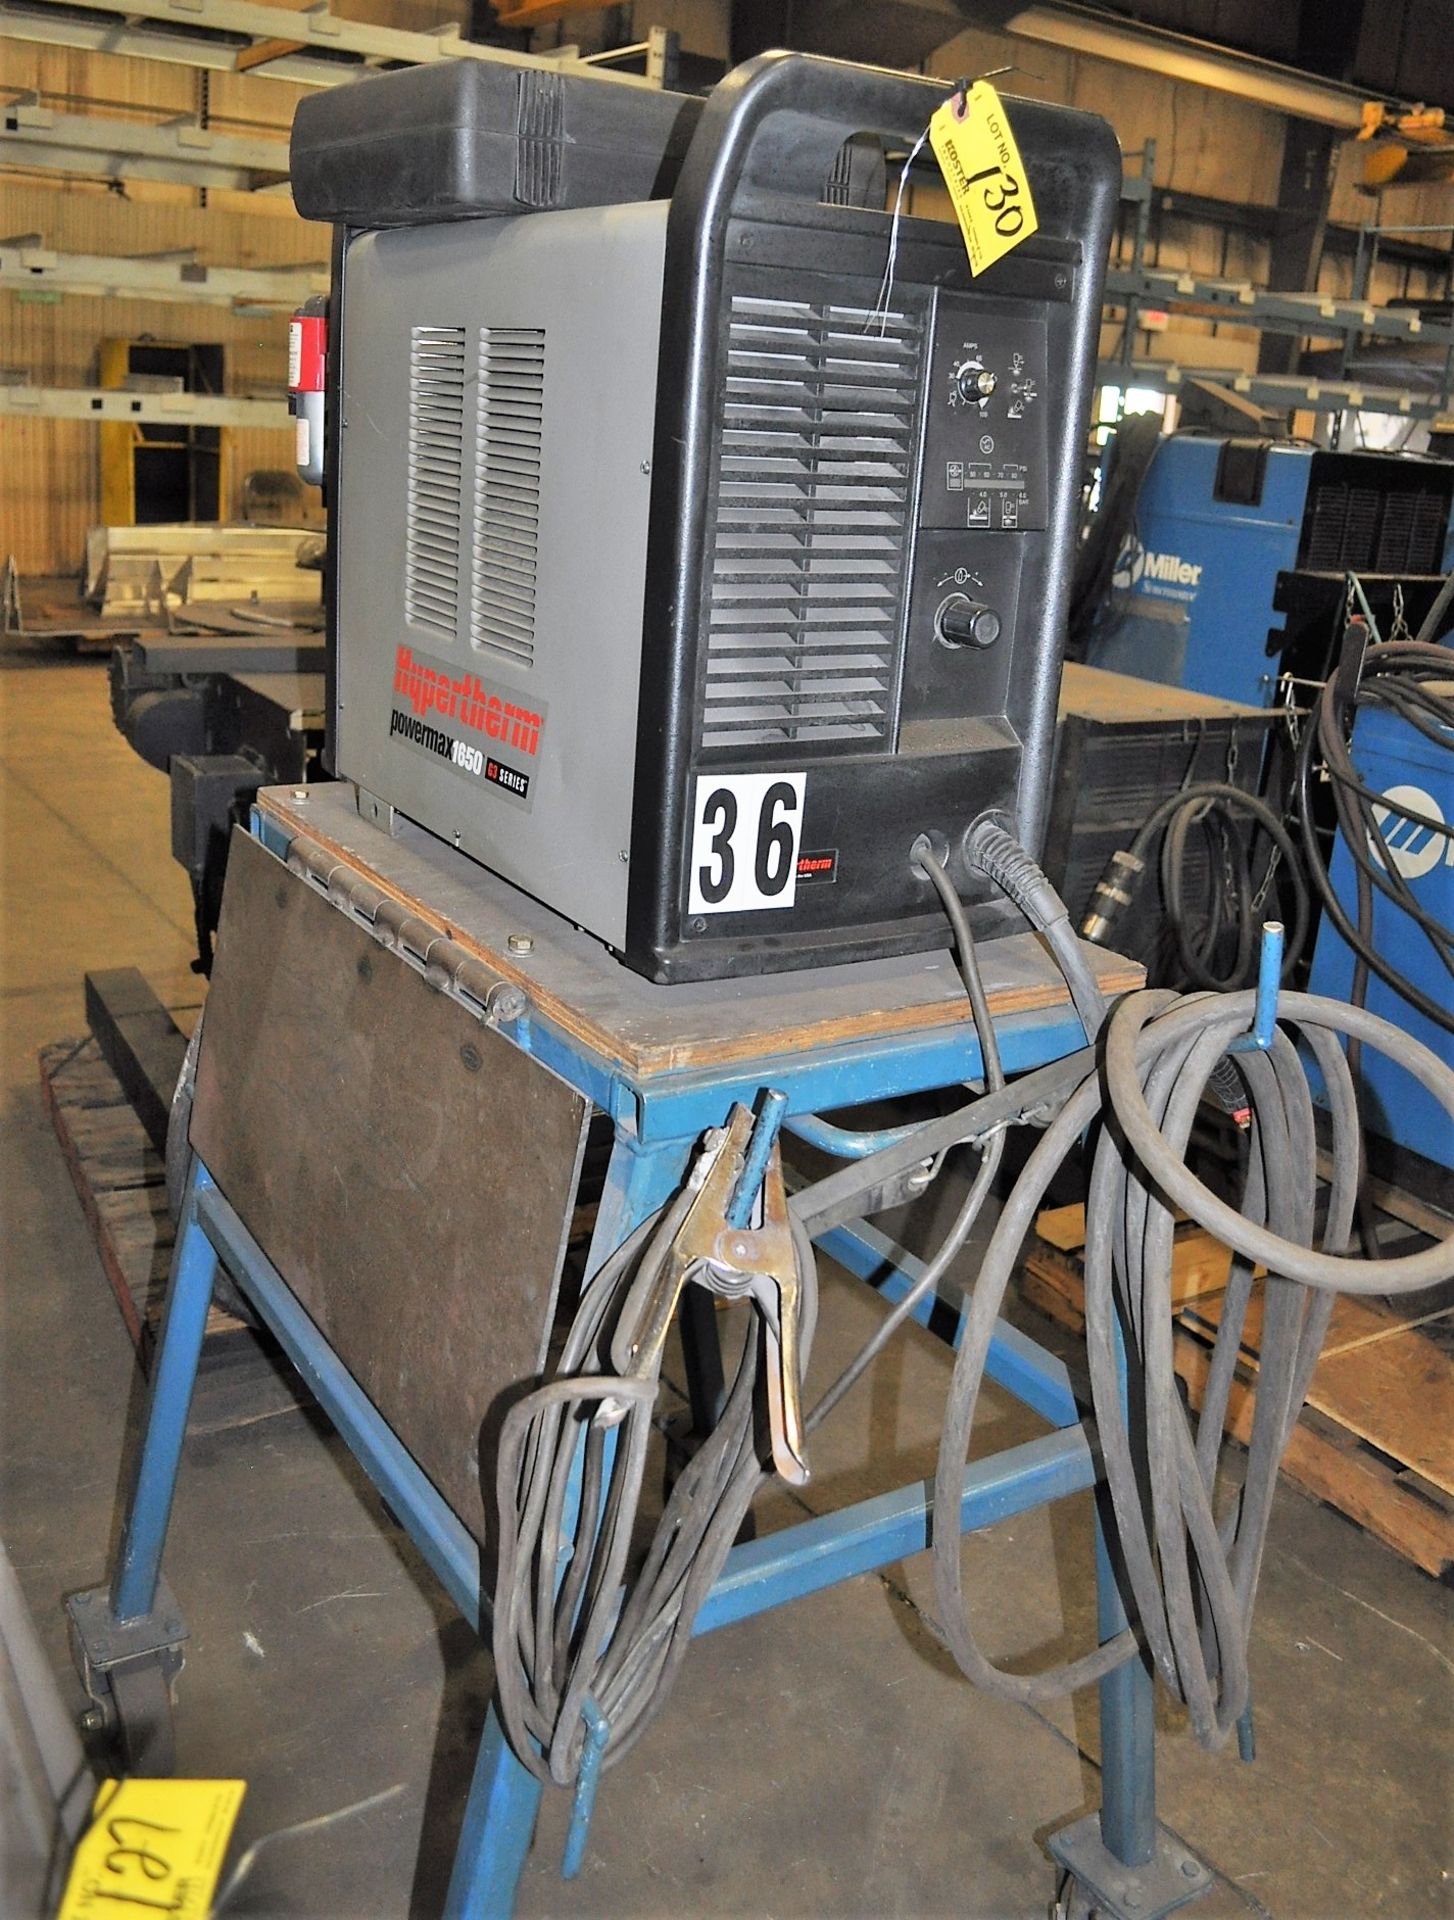 HYPERTHERM POWERMAX 1650 G3 SERIES PLASMA CUTTER & STAND, S/N: 1650-015962 - Image 2 of 3